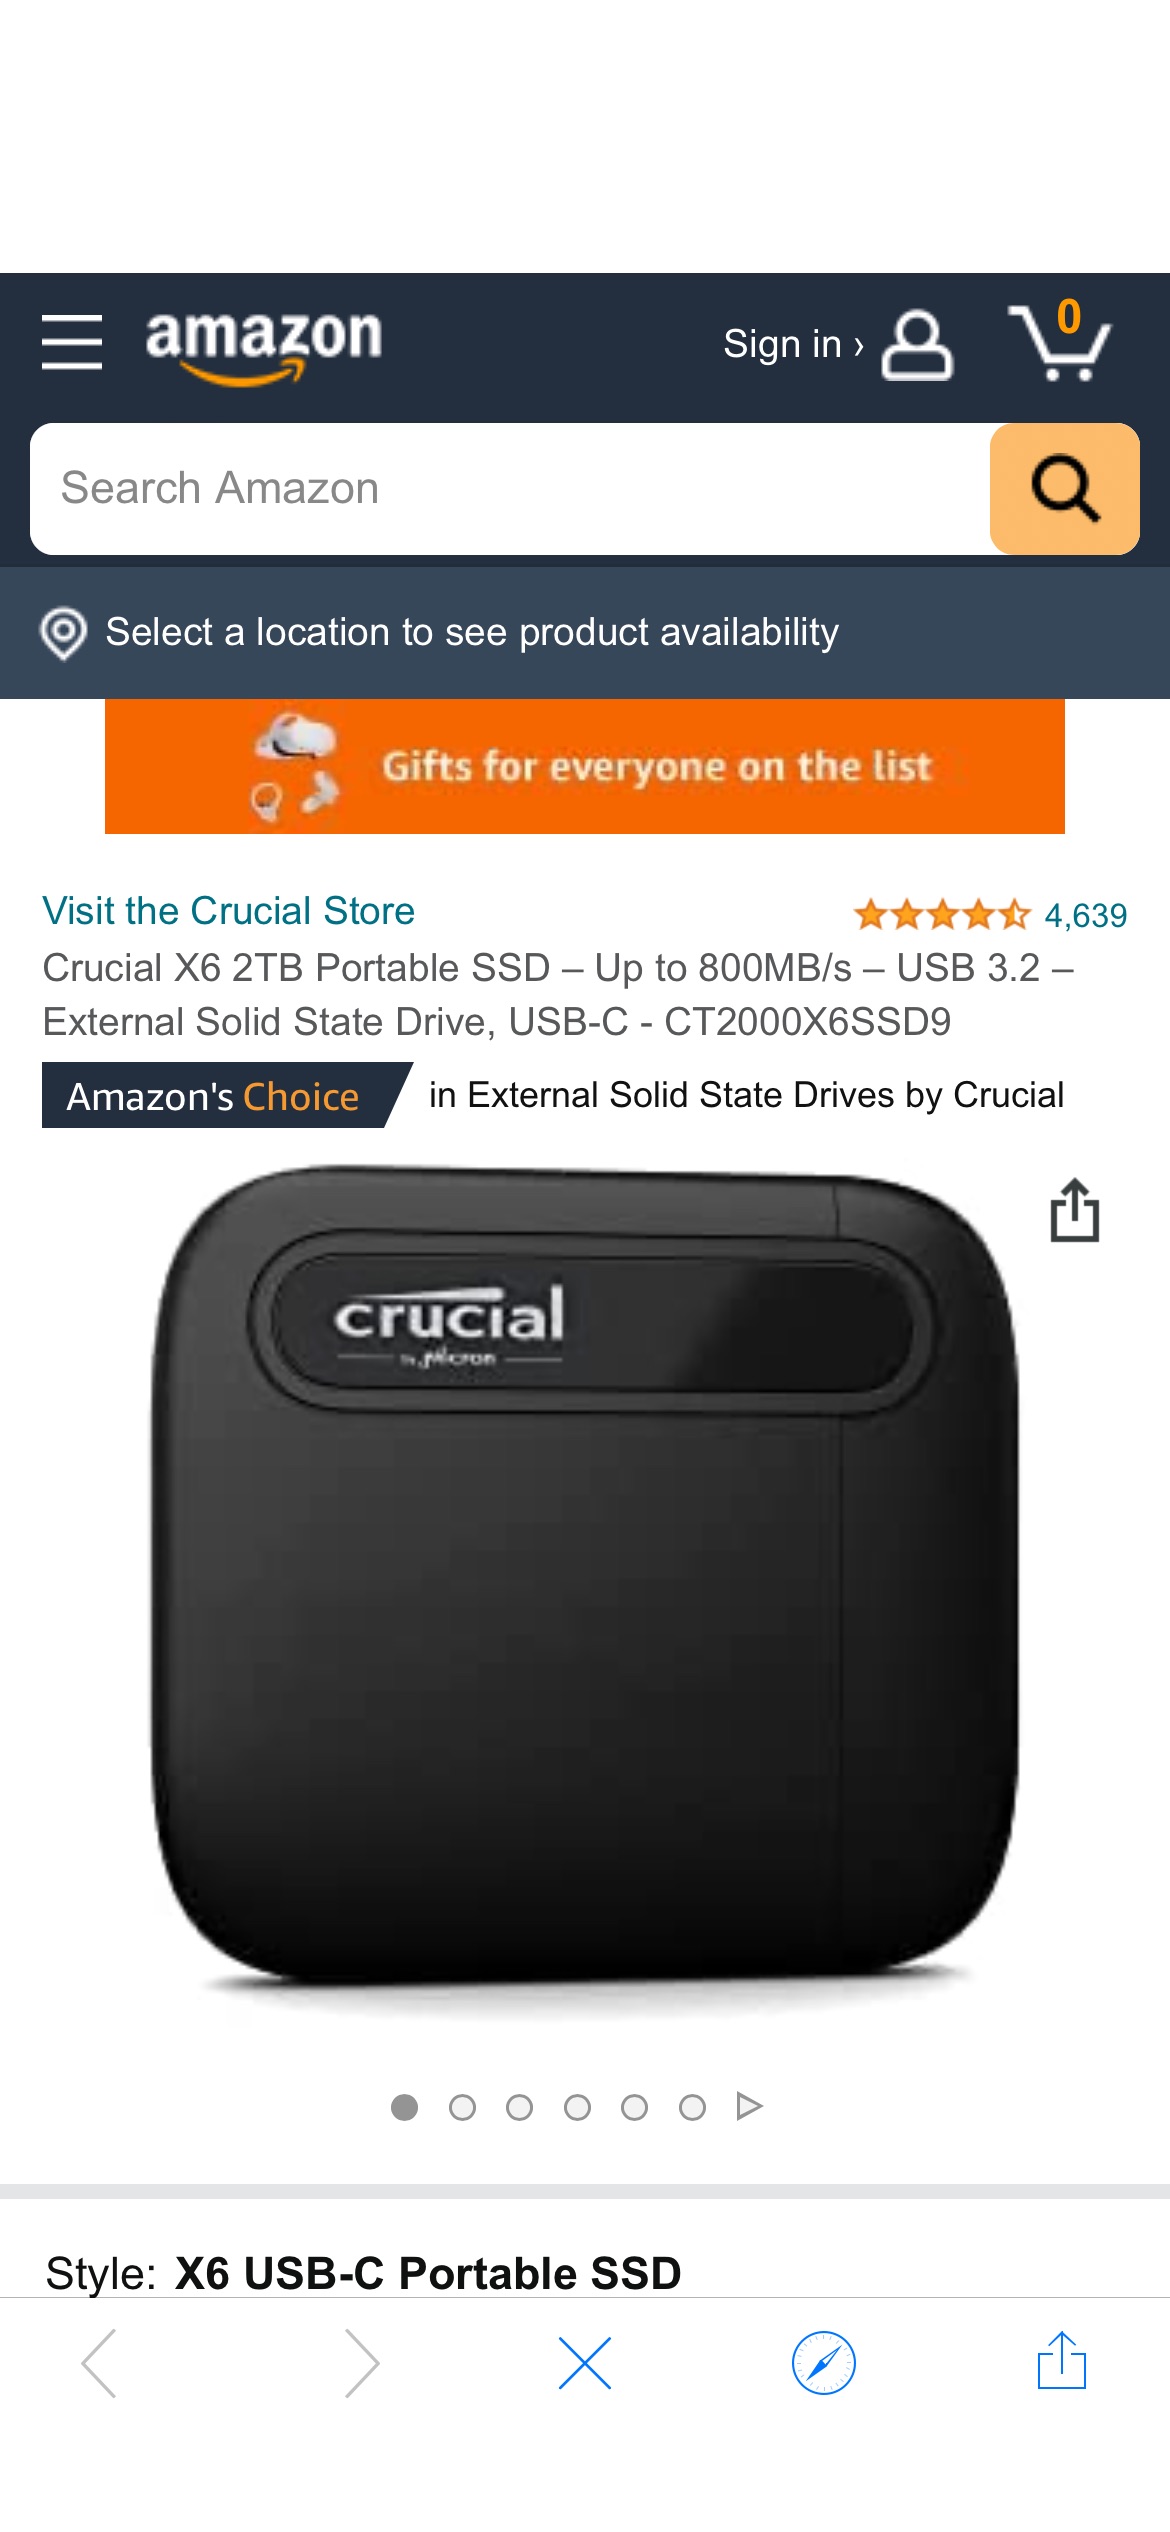 Amazon.com: Crucial X6 2TB Portable SSD – Up to 800MB/s – USB 3.2 – External Solid State Drive, USB-C - CT2000X6SSD9 : Electronics